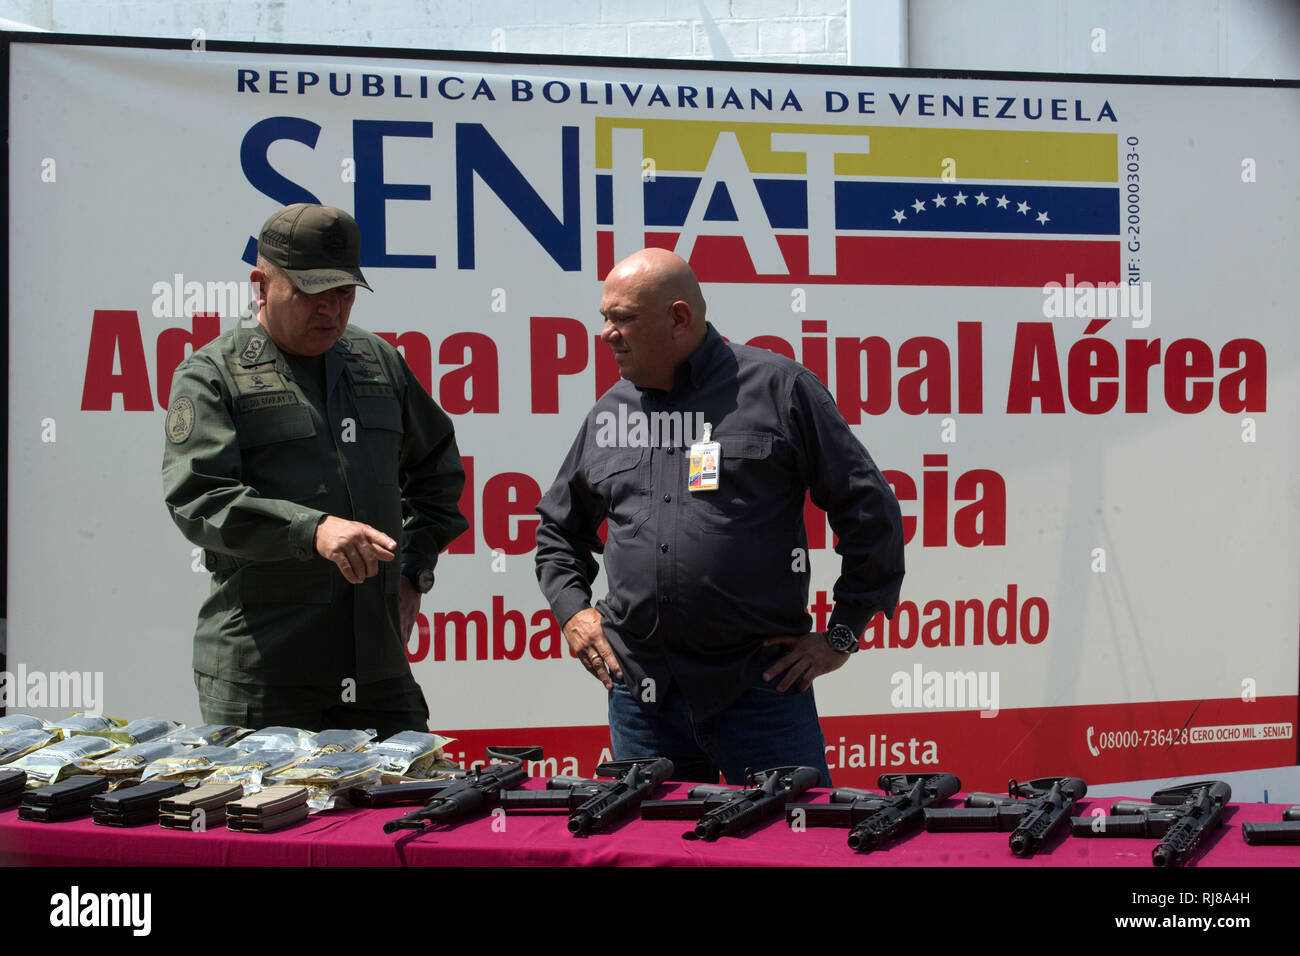 Valencia, Carabobo, Venezuela. 5th Feb, 2019. February 05, 2019. Venezuelan authorities reported on the alleged seizure of war weapons at the Arturo Michelena international airport in the city of Valencia, in the state of Carabobo. The cargo from the city of Miami, in the United States, in an Air Bus passenger plane, used for cargo transfer, brought in a lot of rifles and assault weapons, cell phones, telescopic sights and projectile chargers. Local authorities reported that the case is being investigated and no one is known to have been arrested. Photo: Juan Carlos Hernandez (Credit Im Stock Photo